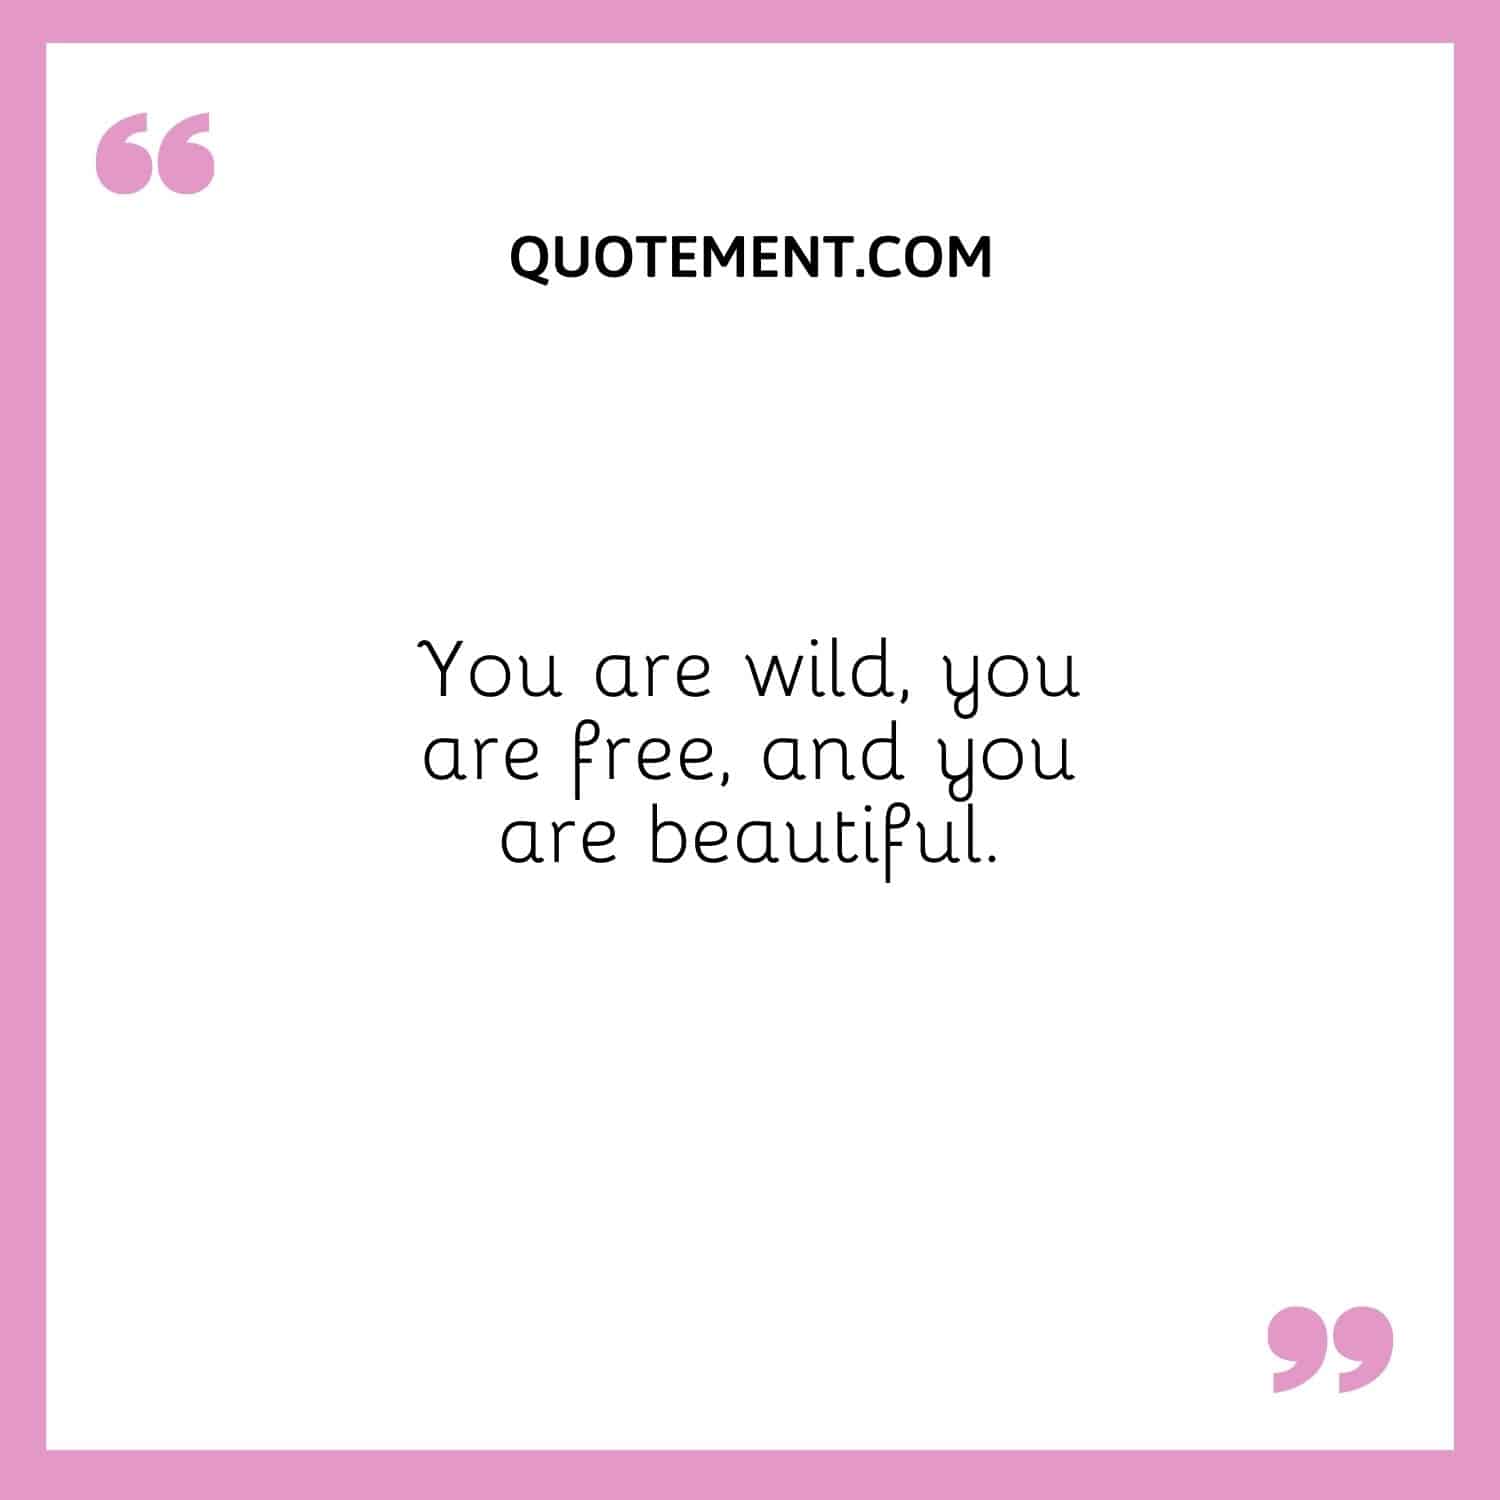 . You are wild, you are free, and you are beautiful.